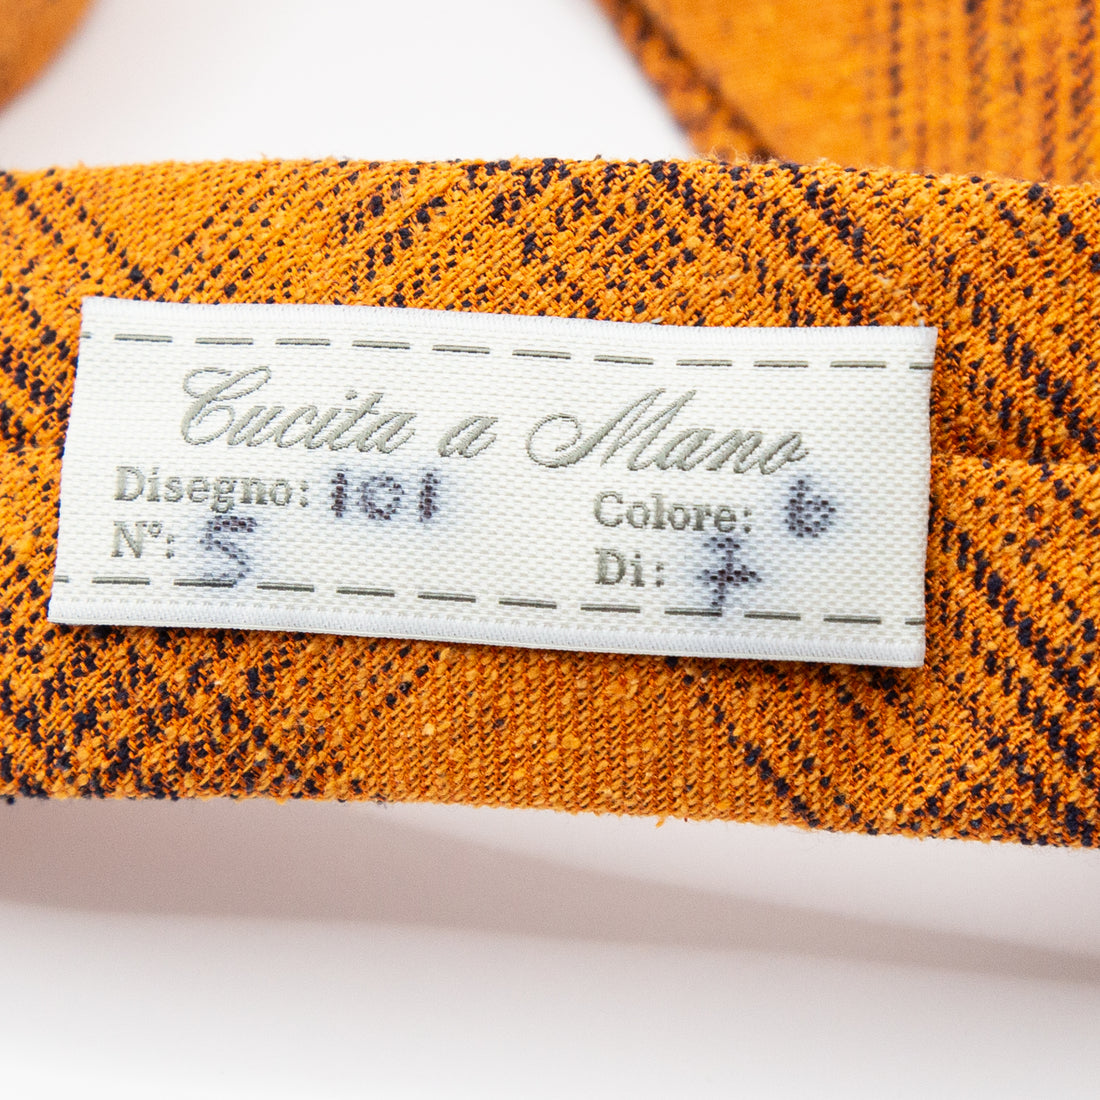 JACQUES MONCLEEF Italian Heavy Woven Textured Check Silk Neck Tie in Orange